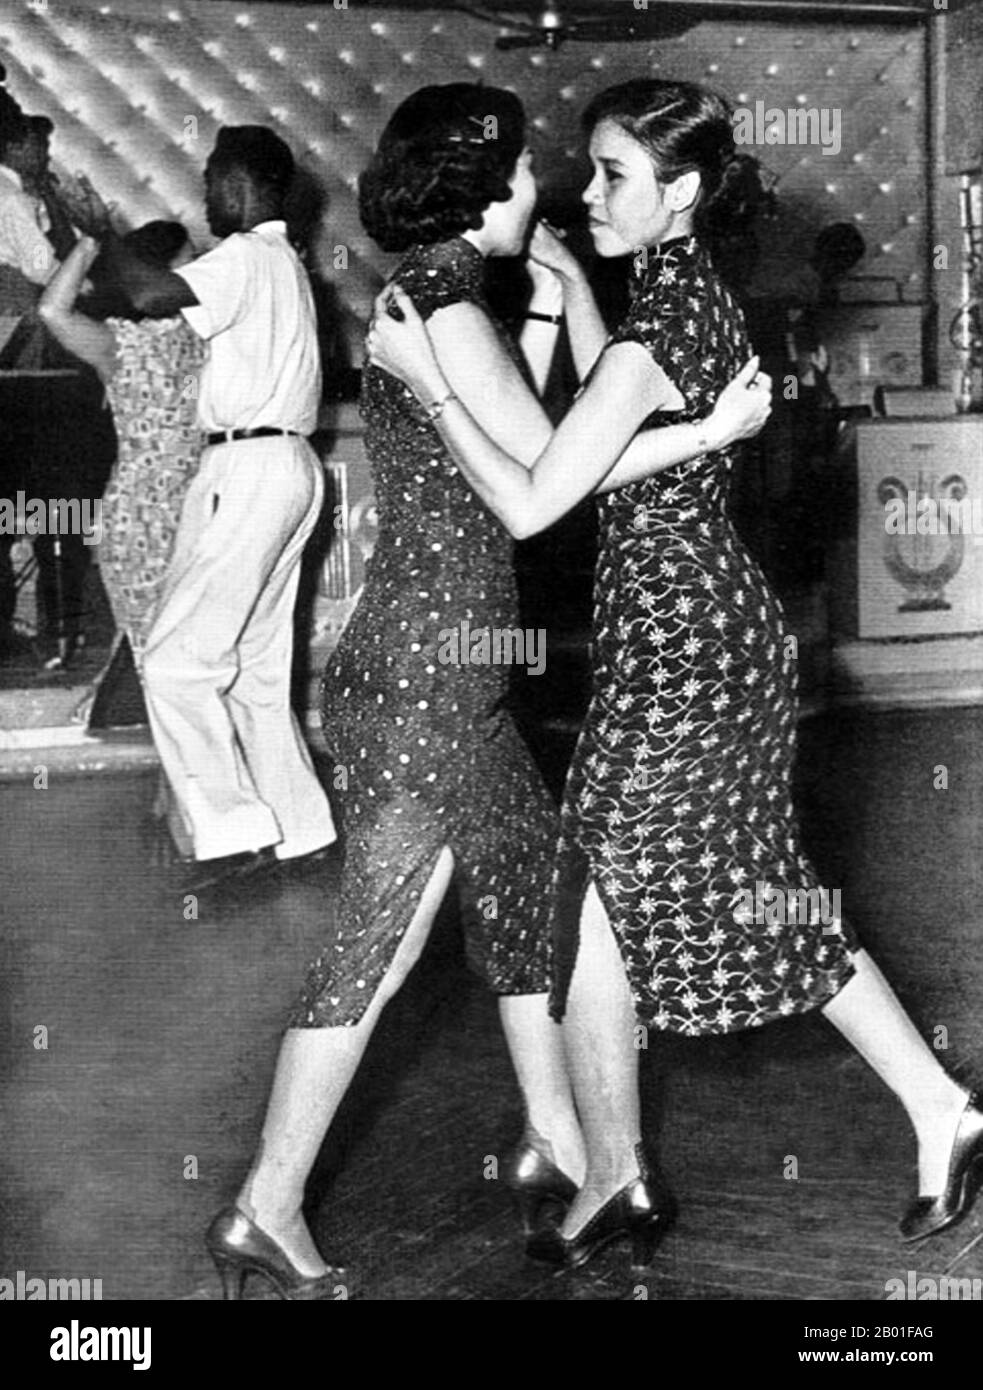 Vietnam: Taxi dancers dancing together at the Arc-en-Ciel Club on Jaccareo Road, Cholon, c. 1952.  The Arc-en-Ciel was arguably Saigon's top night spot during the 1940s and 1950s. Located in Saigon's twin city of Cholon on Jaccareo Avenue - today's Tan Da - it features prominently in Graham Greene's 'The Quiet American' as the taxi dance venue where Thomas Fowler met and wooed Phuong. Stock Photo